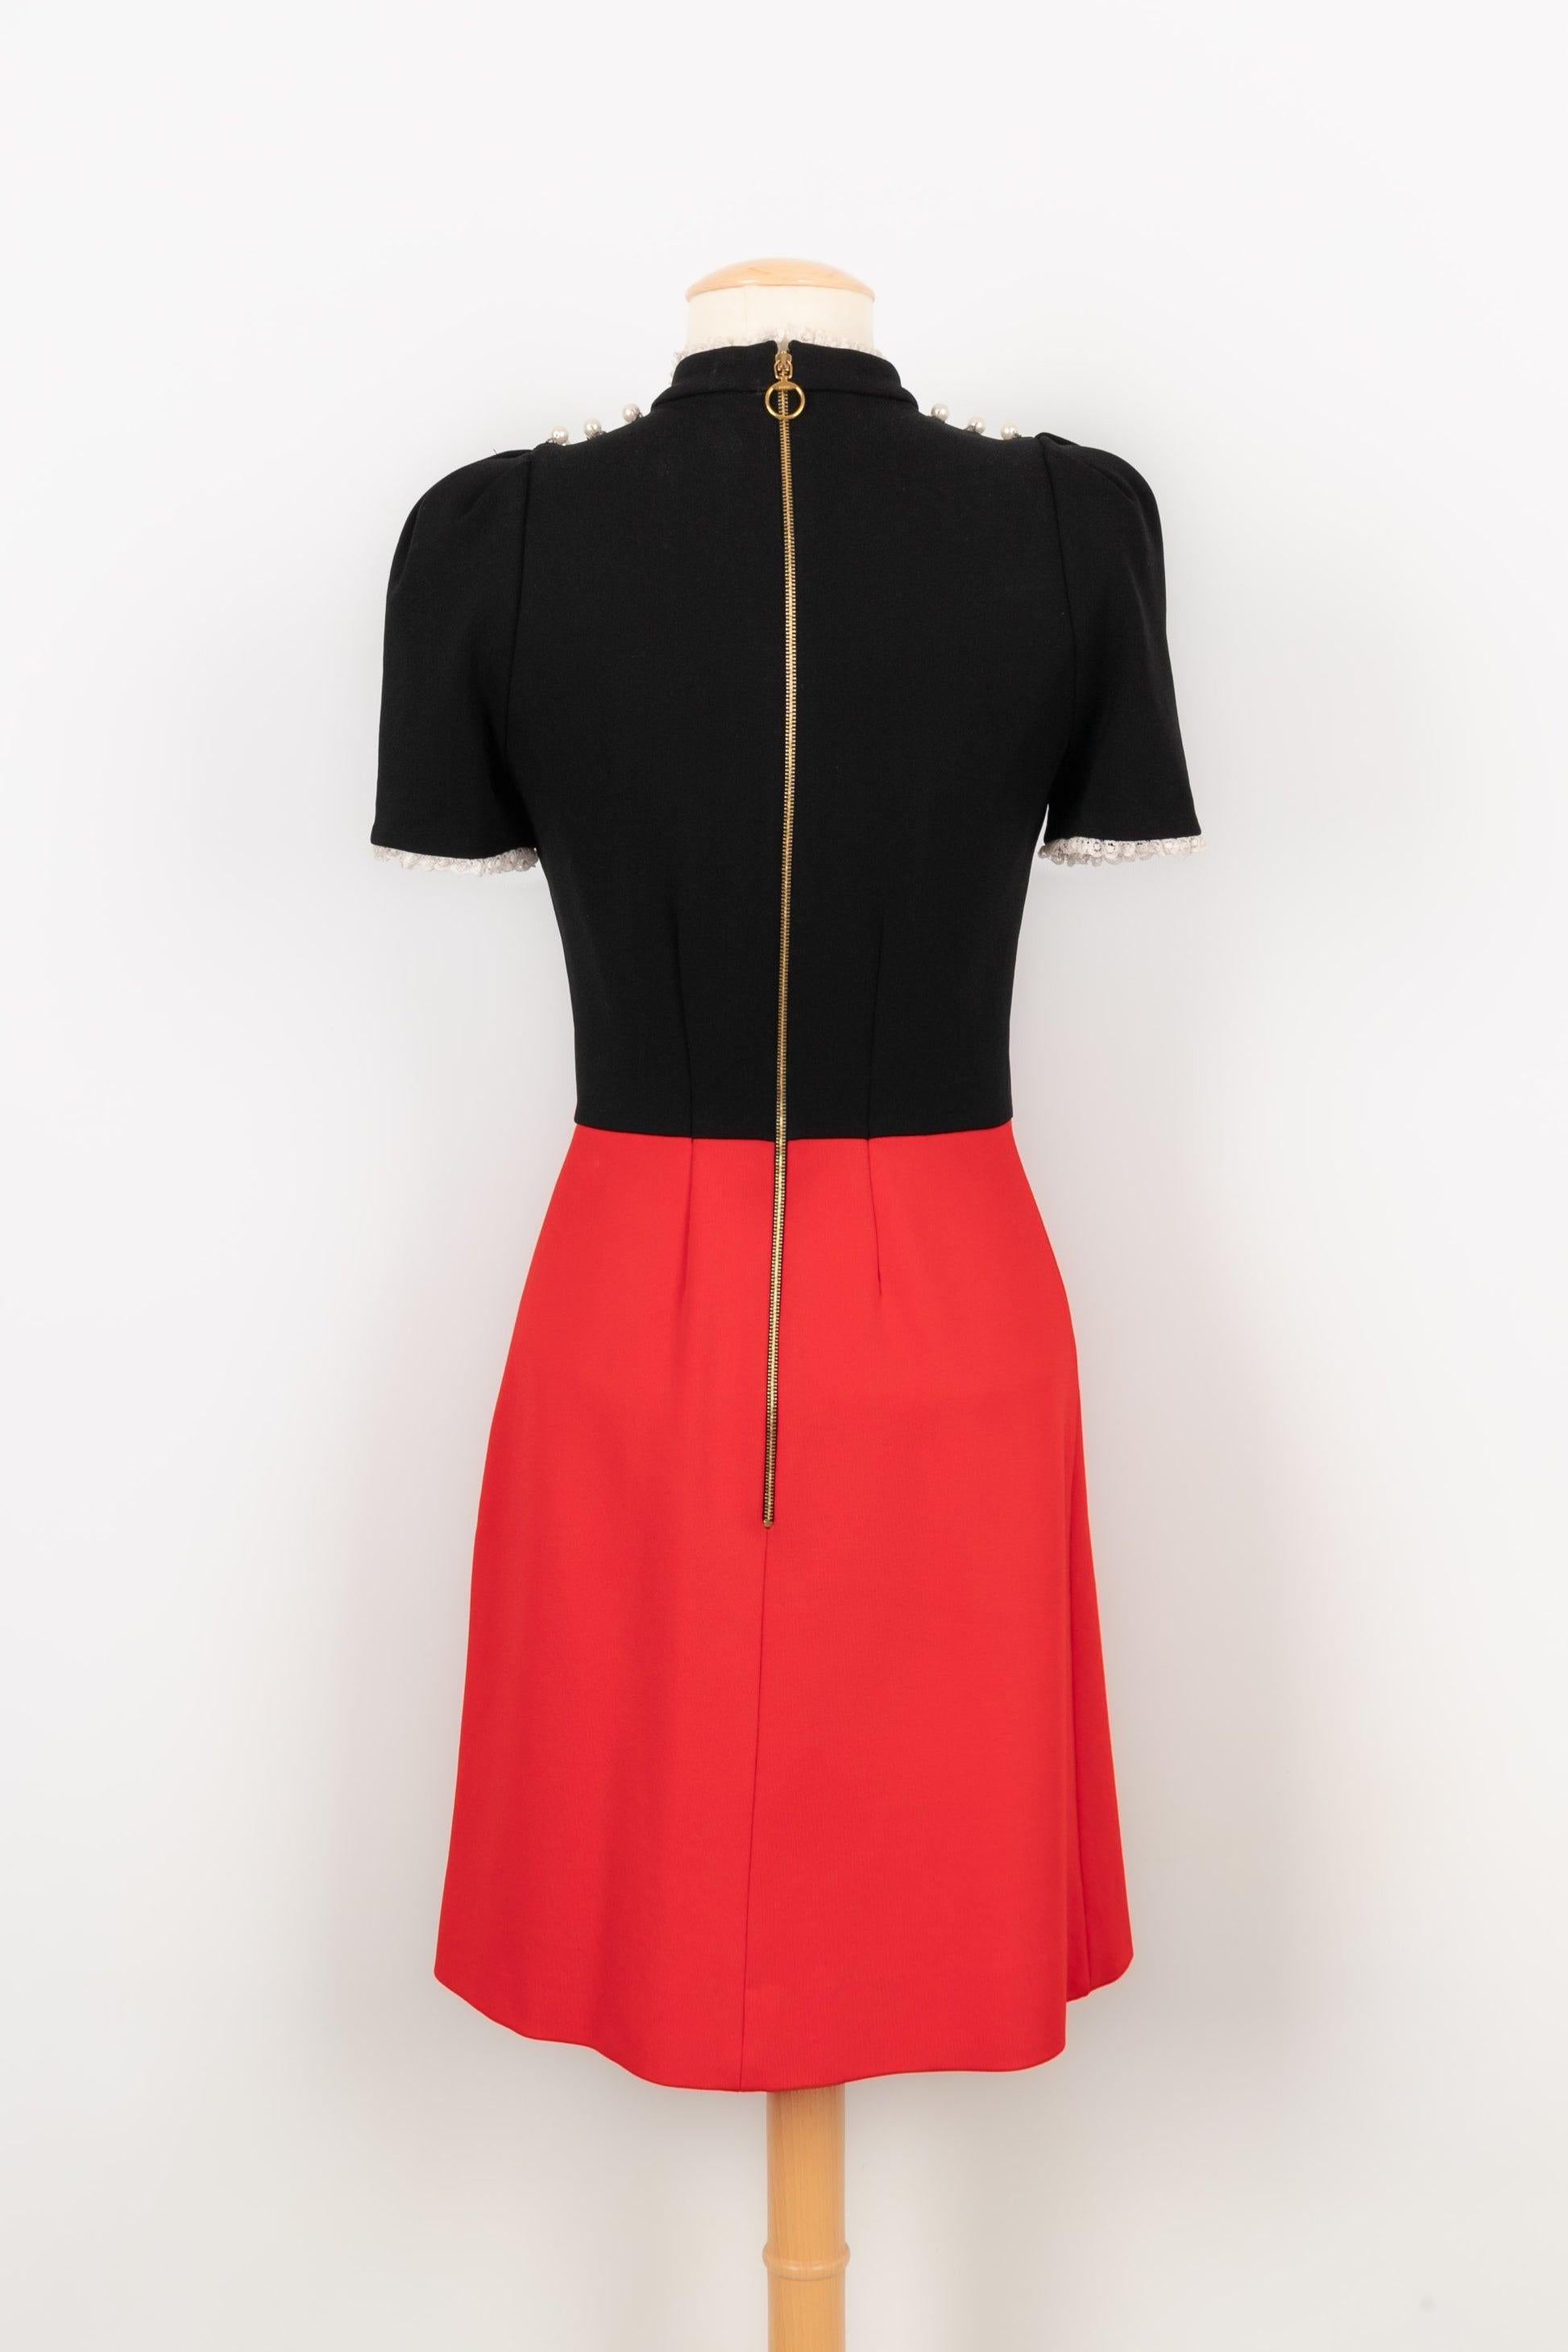 Red Gucci Blended Cotton Dress Sewn with Jewelry For Sale